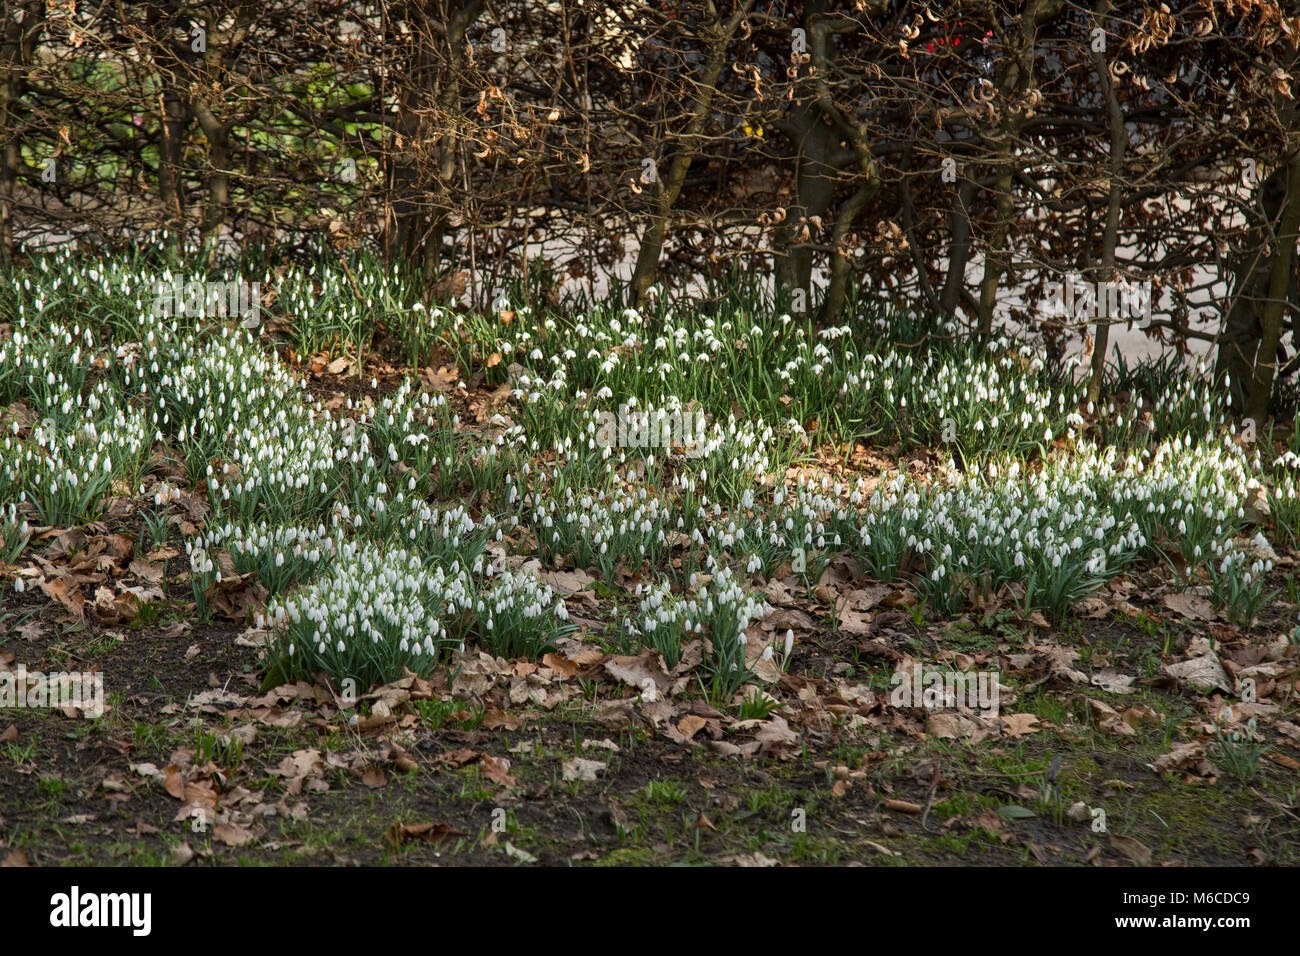 Snowdrops (galanthus) in abundance in a winter flower bed. Stock Photo